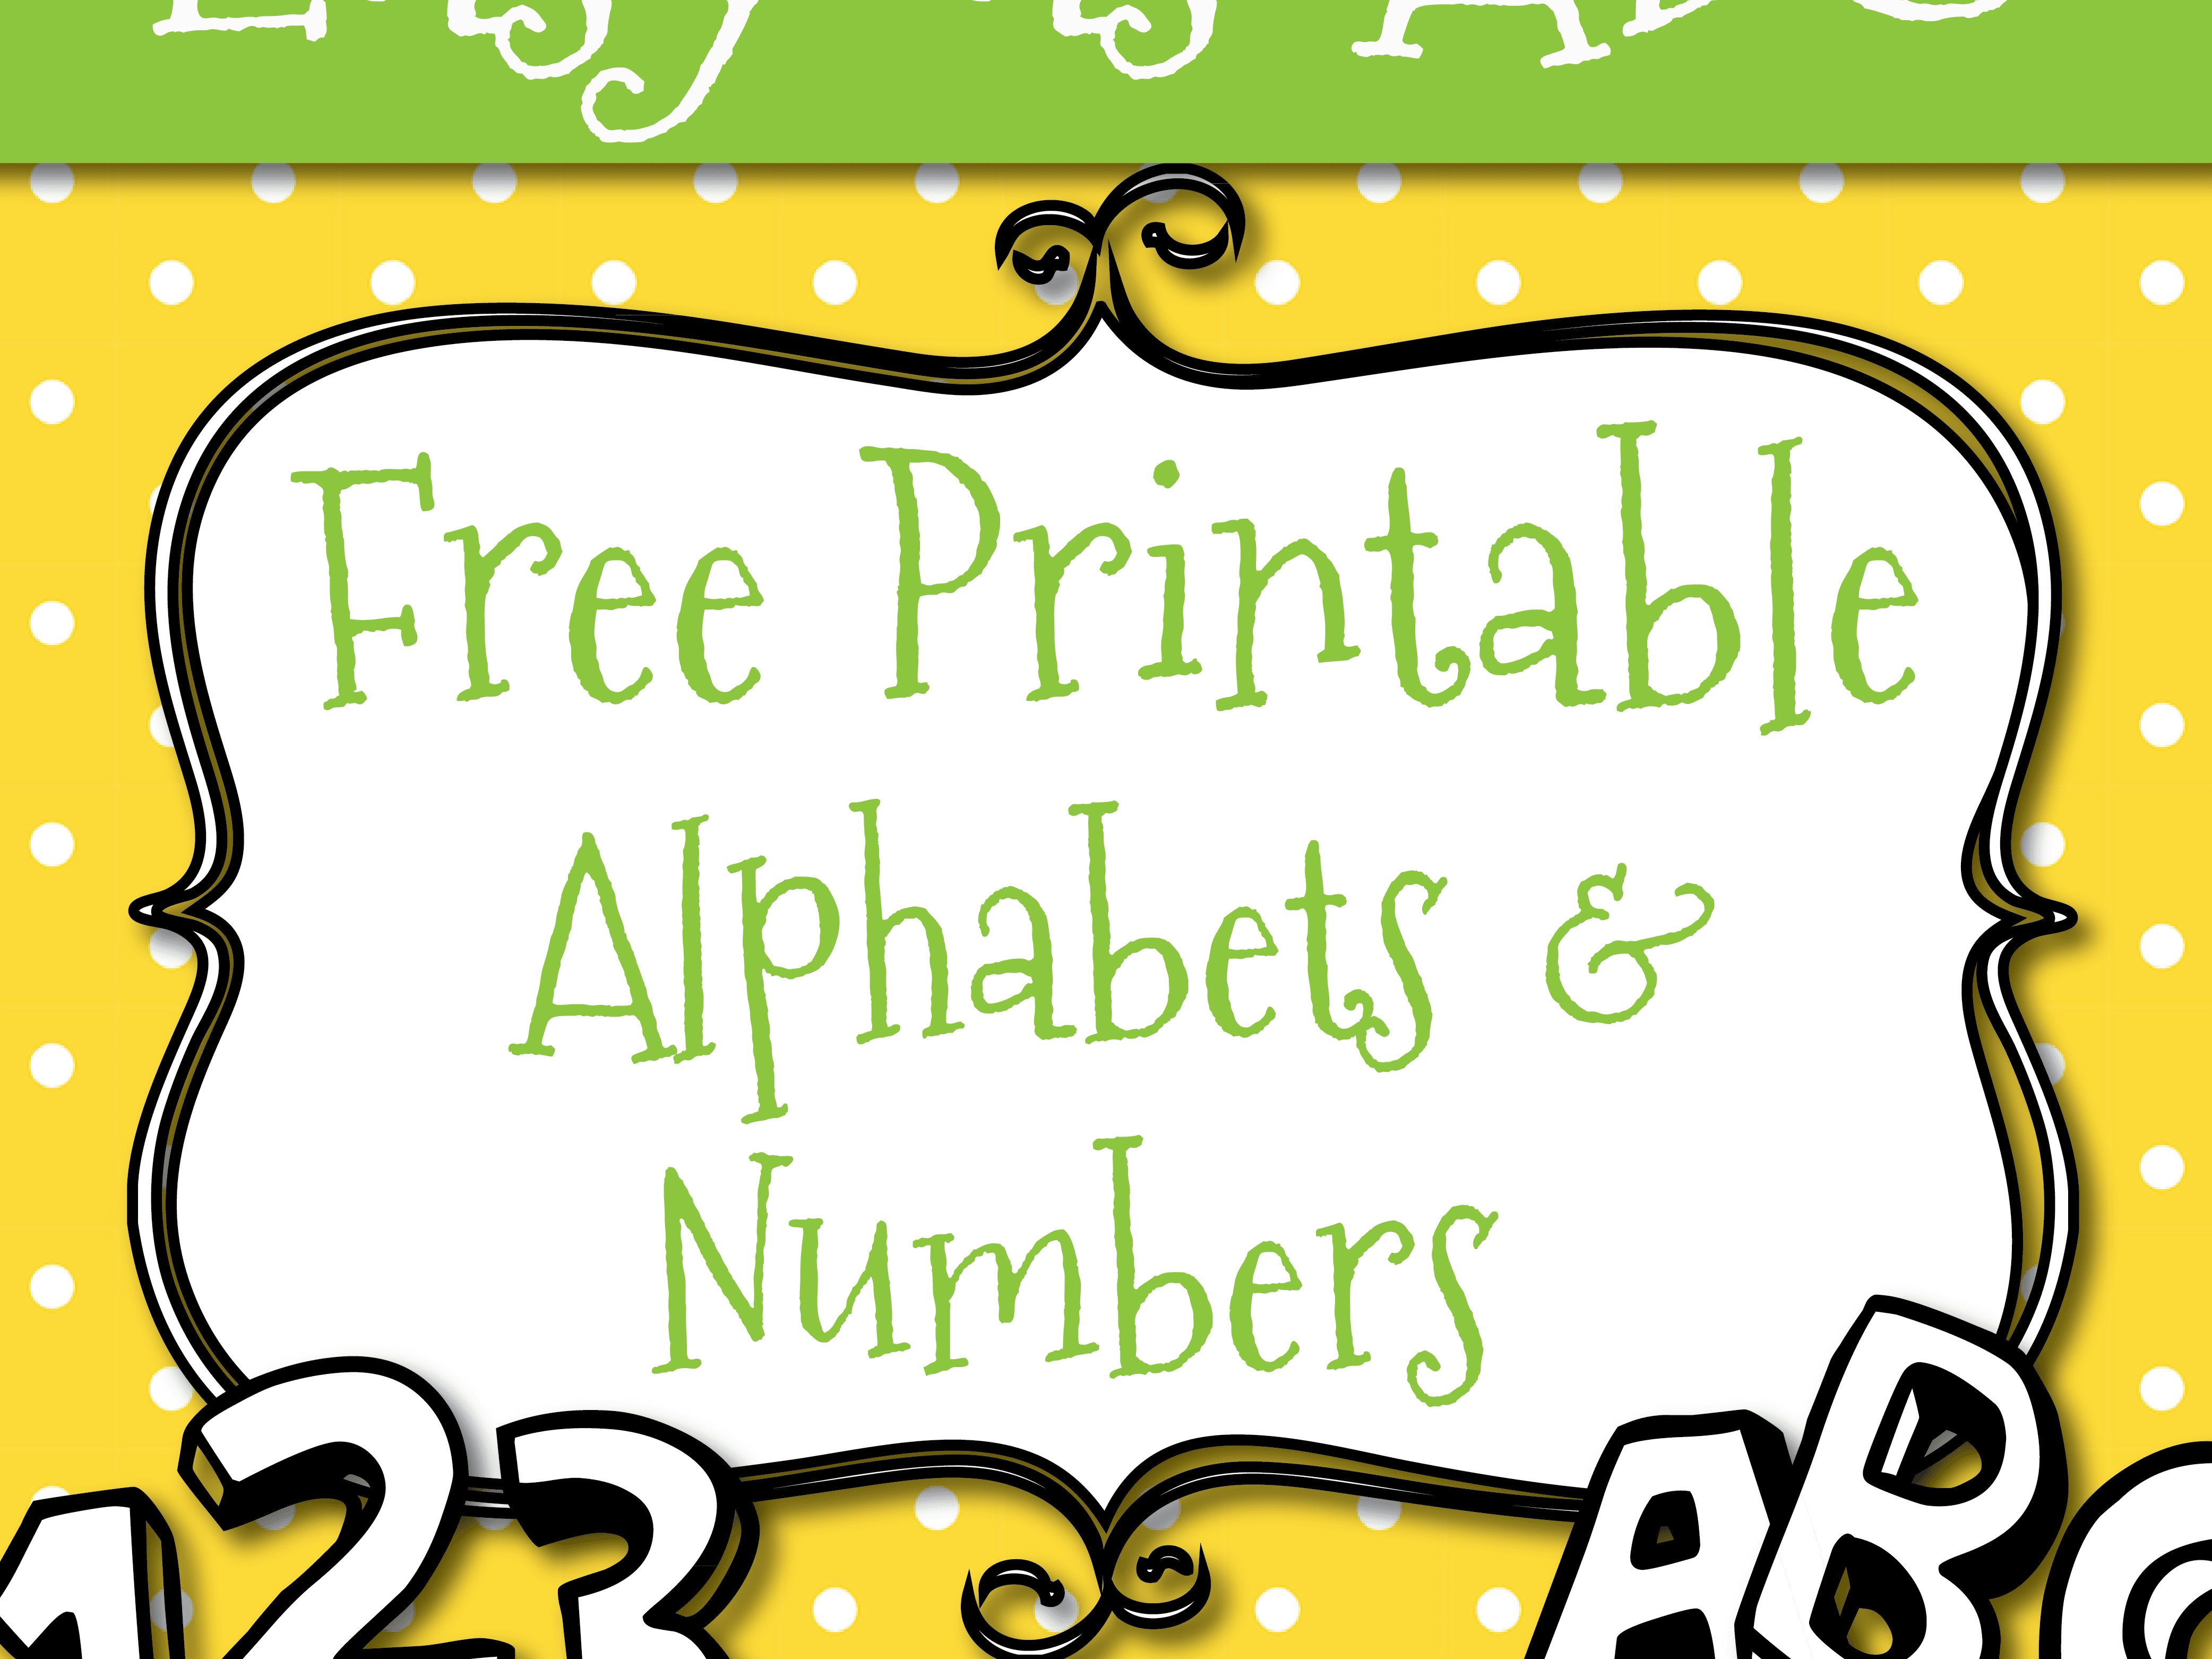 Free Printable Letters And Numbers For Crafts - Free Printable Letters And Numbers